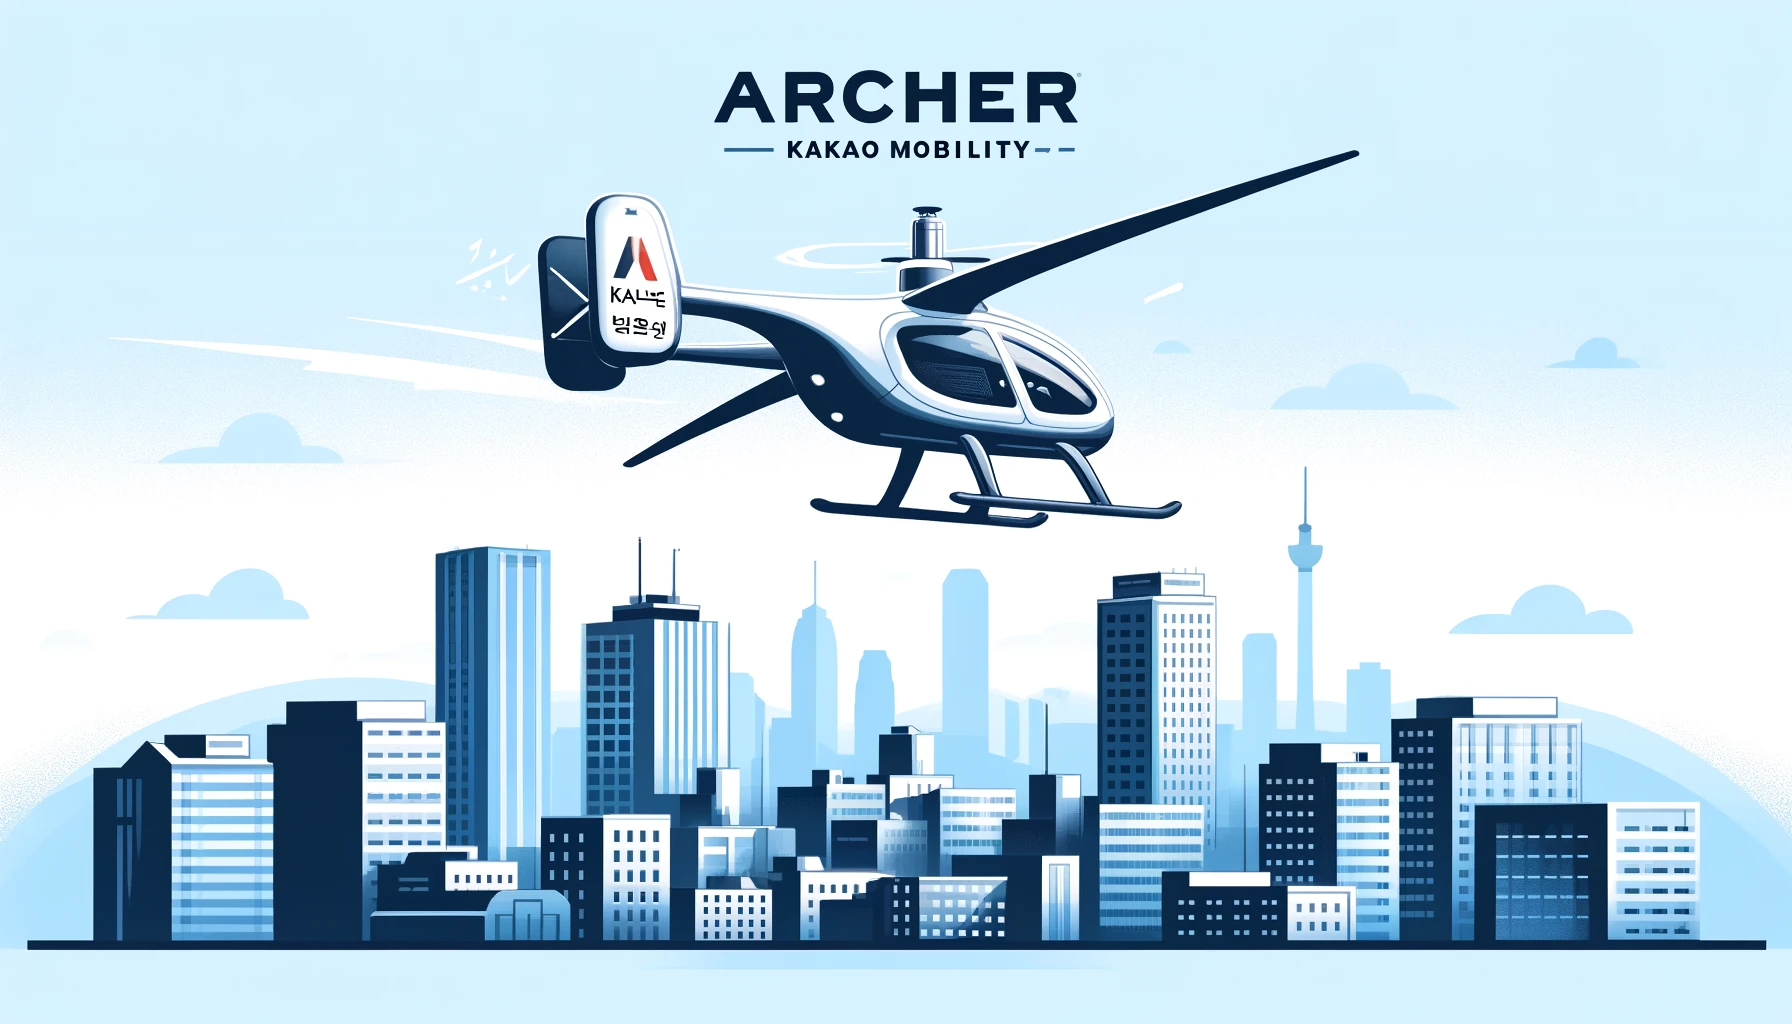 Archer and Kakao Mobility to Launch Innovative Electric Air Taxis in South Korea by 2026